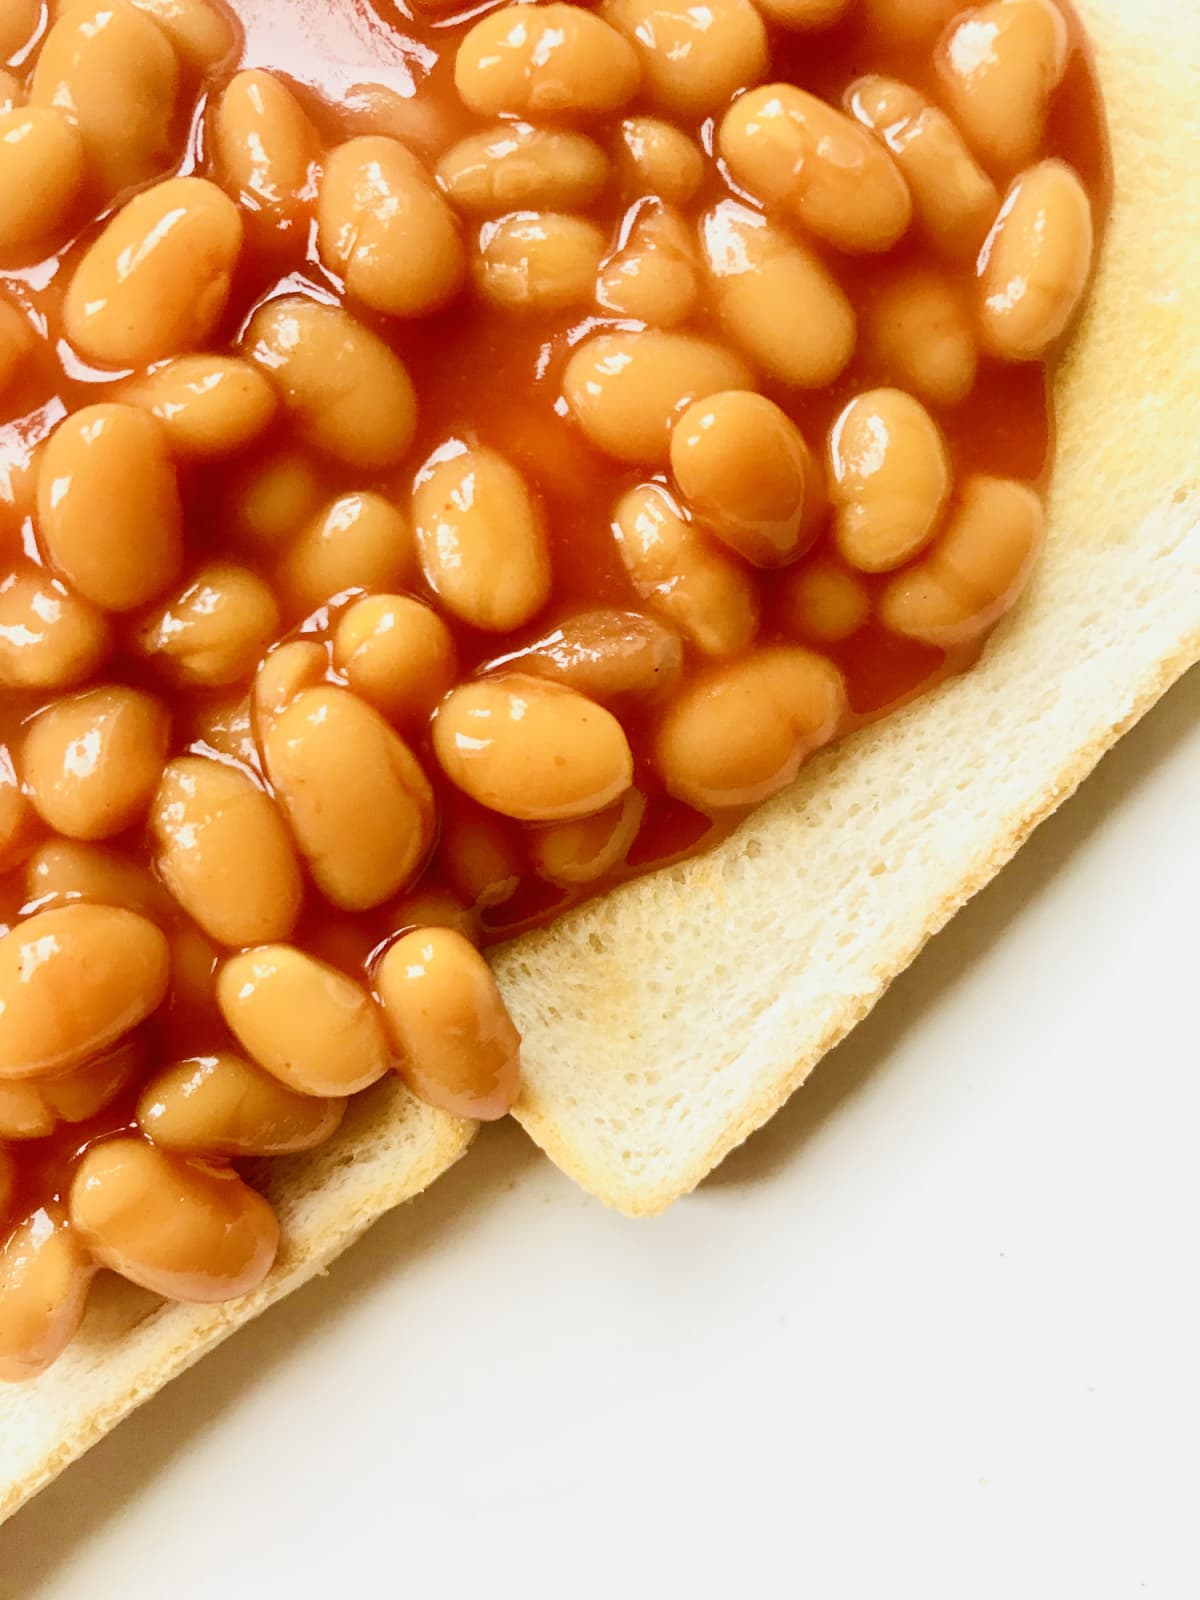 Baked beans in a rich tomato sauce served on white toast